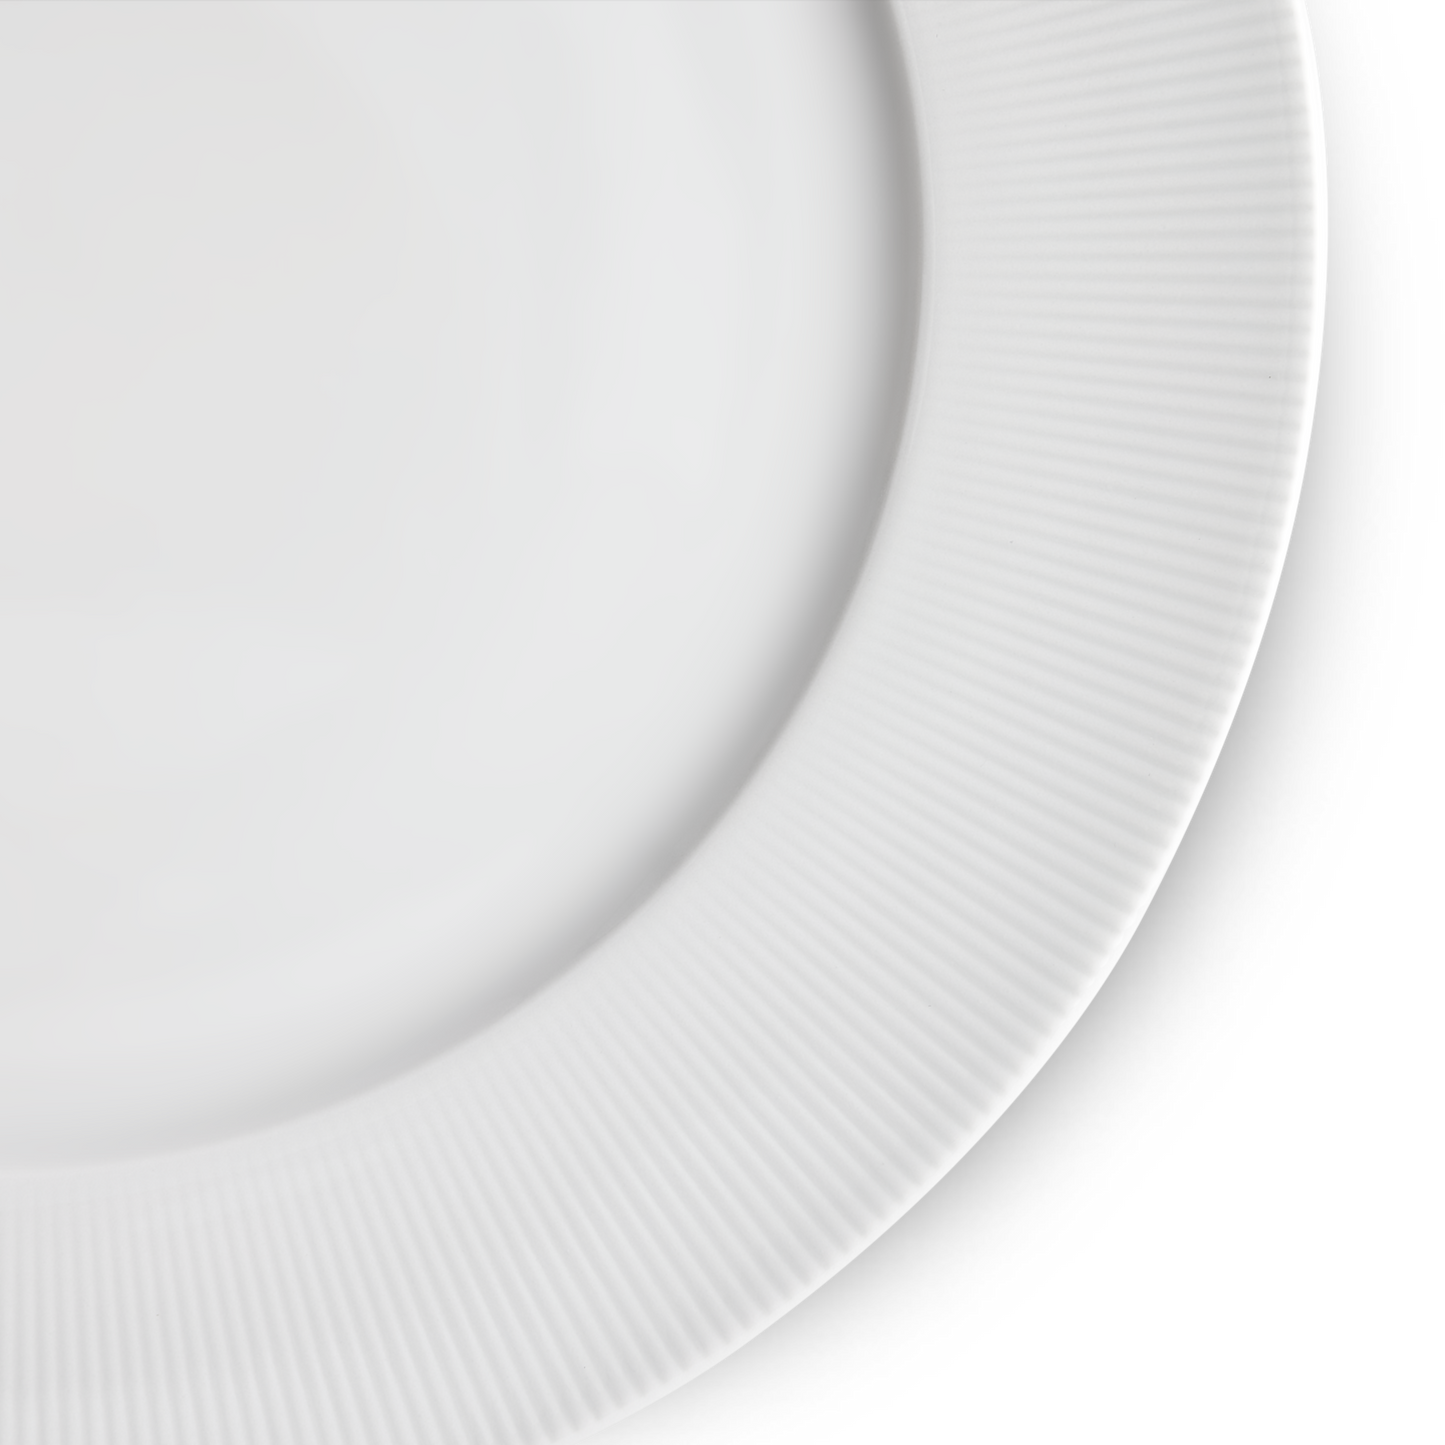 Eventail 8.5" Rimmed Soup Plate, Set of 4